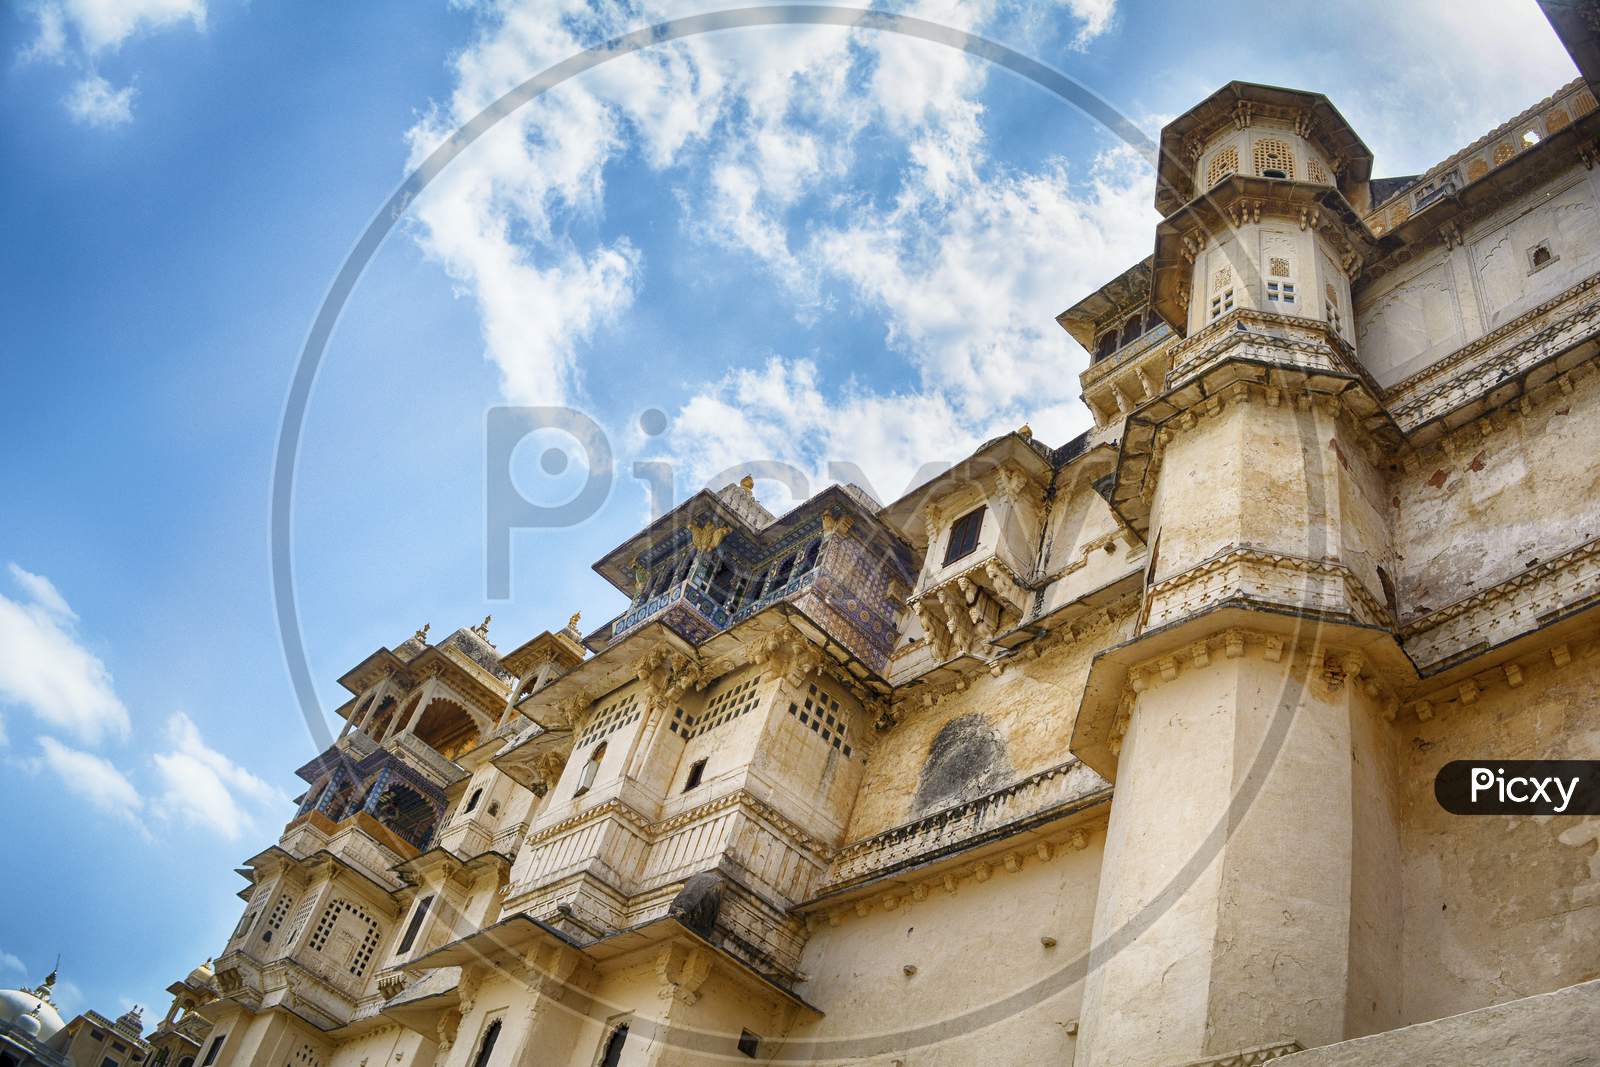 Architecture in Rajasthan